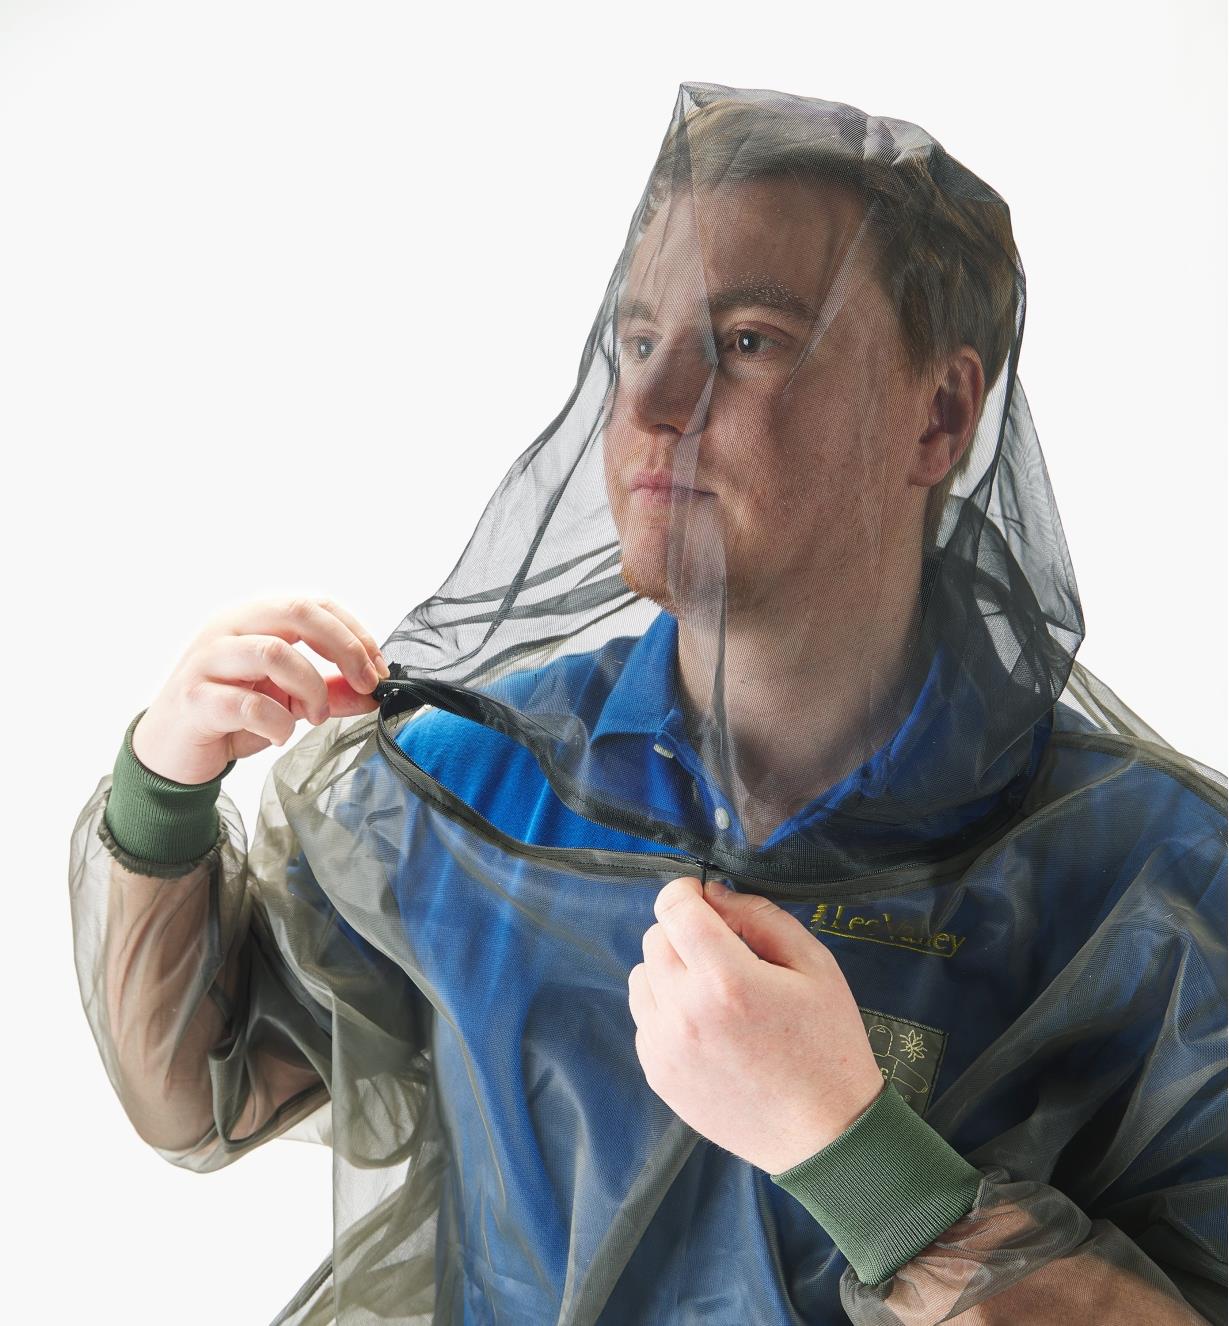 A man wearing a hooded bug-protection shirt opens a zipper at the neck